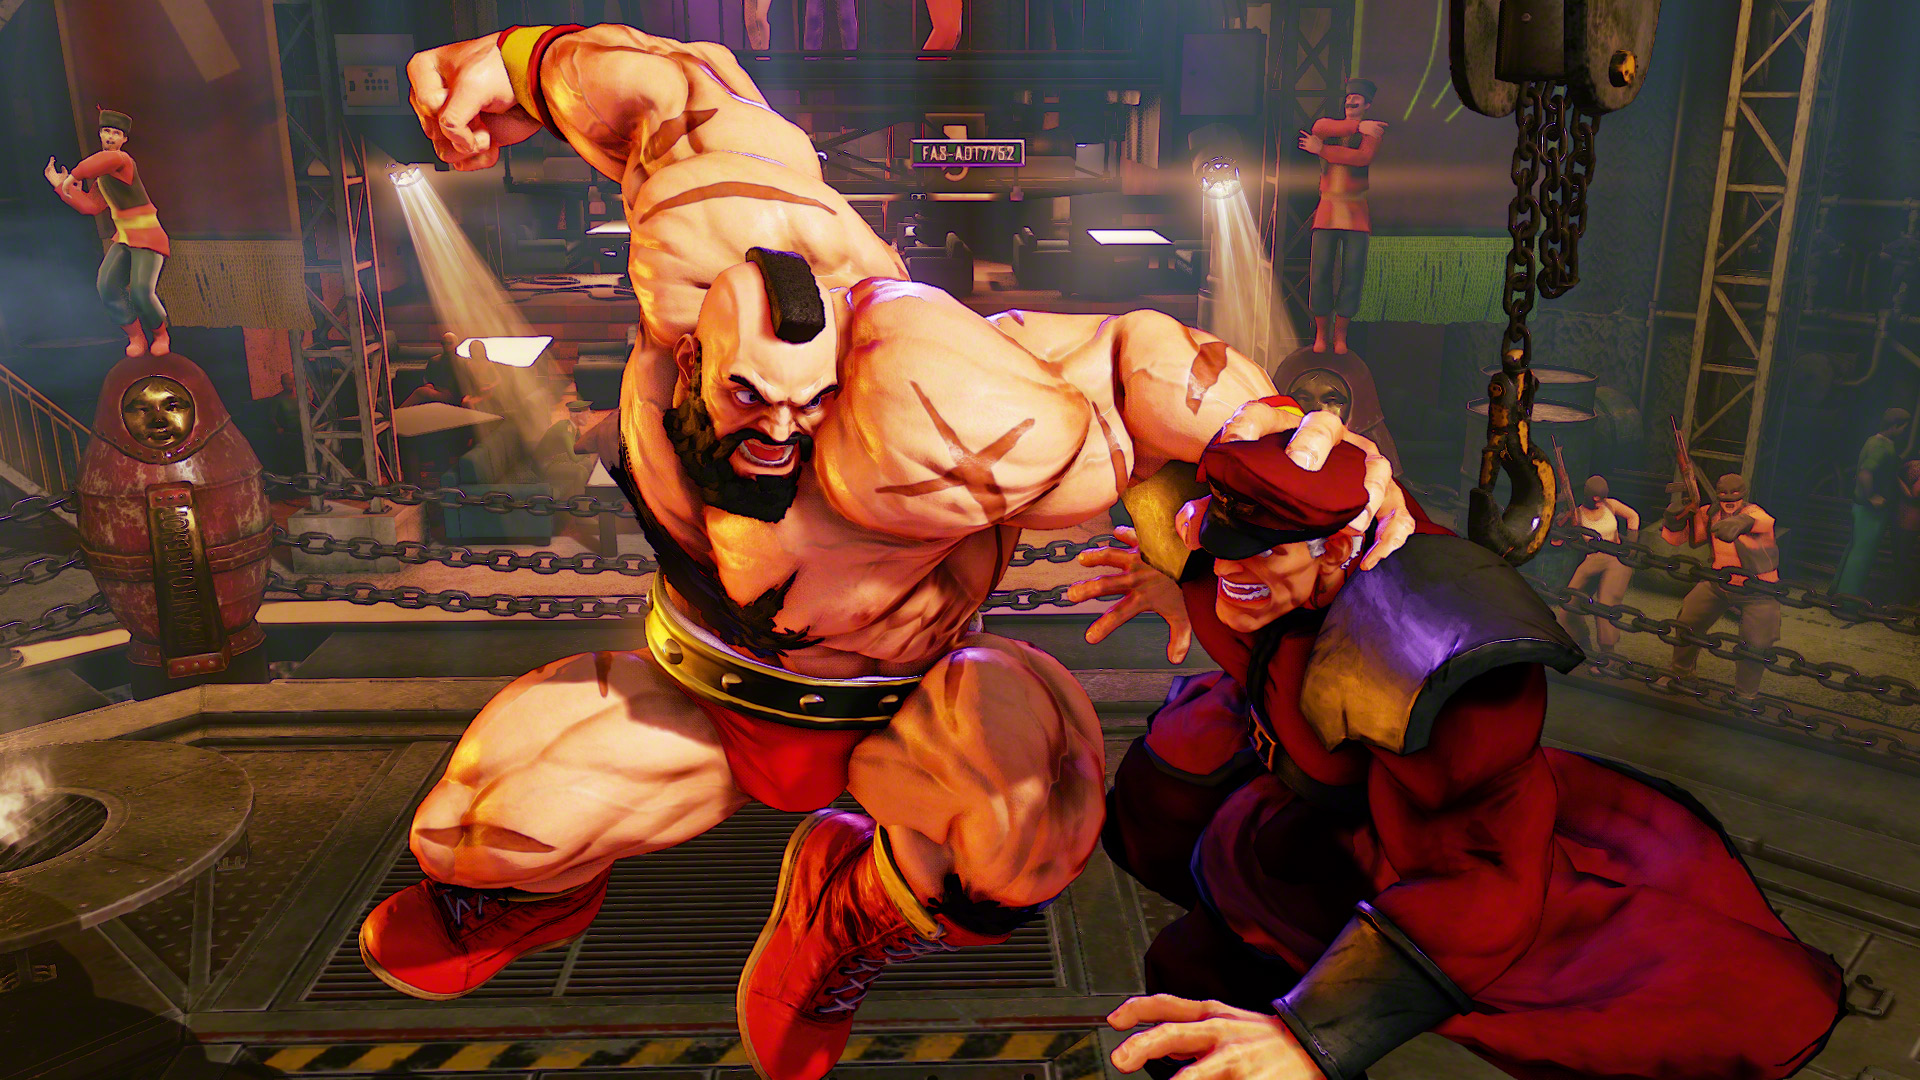 “Street Fighter V” March Update Date Revealed - Promised Features Coming End of March